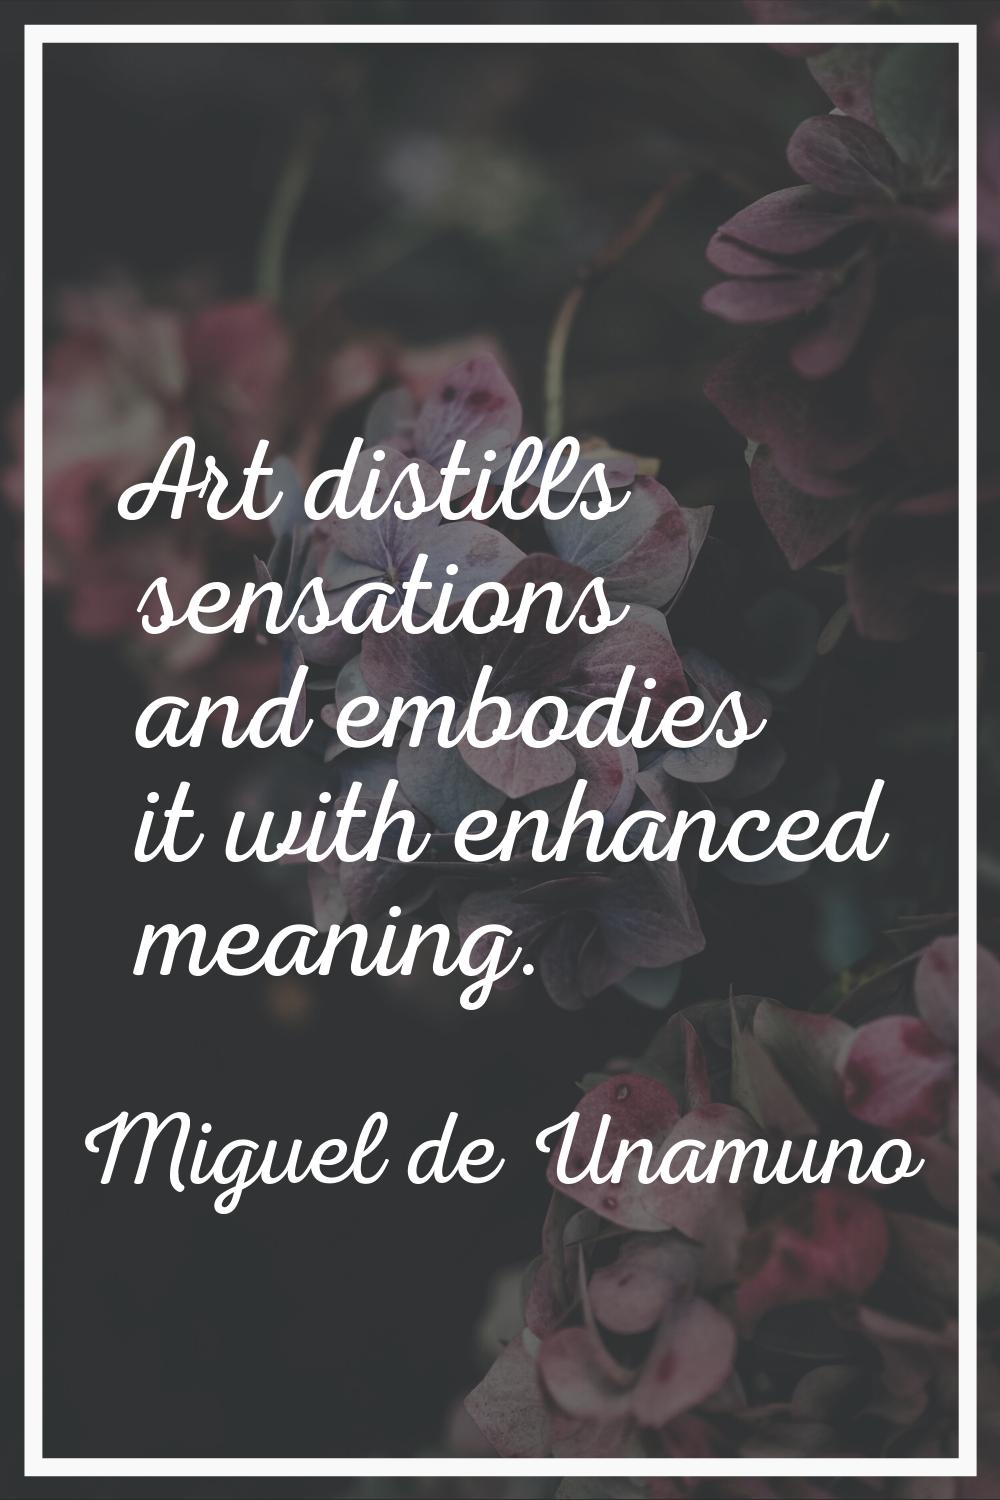 Art distills sensations and embodies it with enhanced meaning.